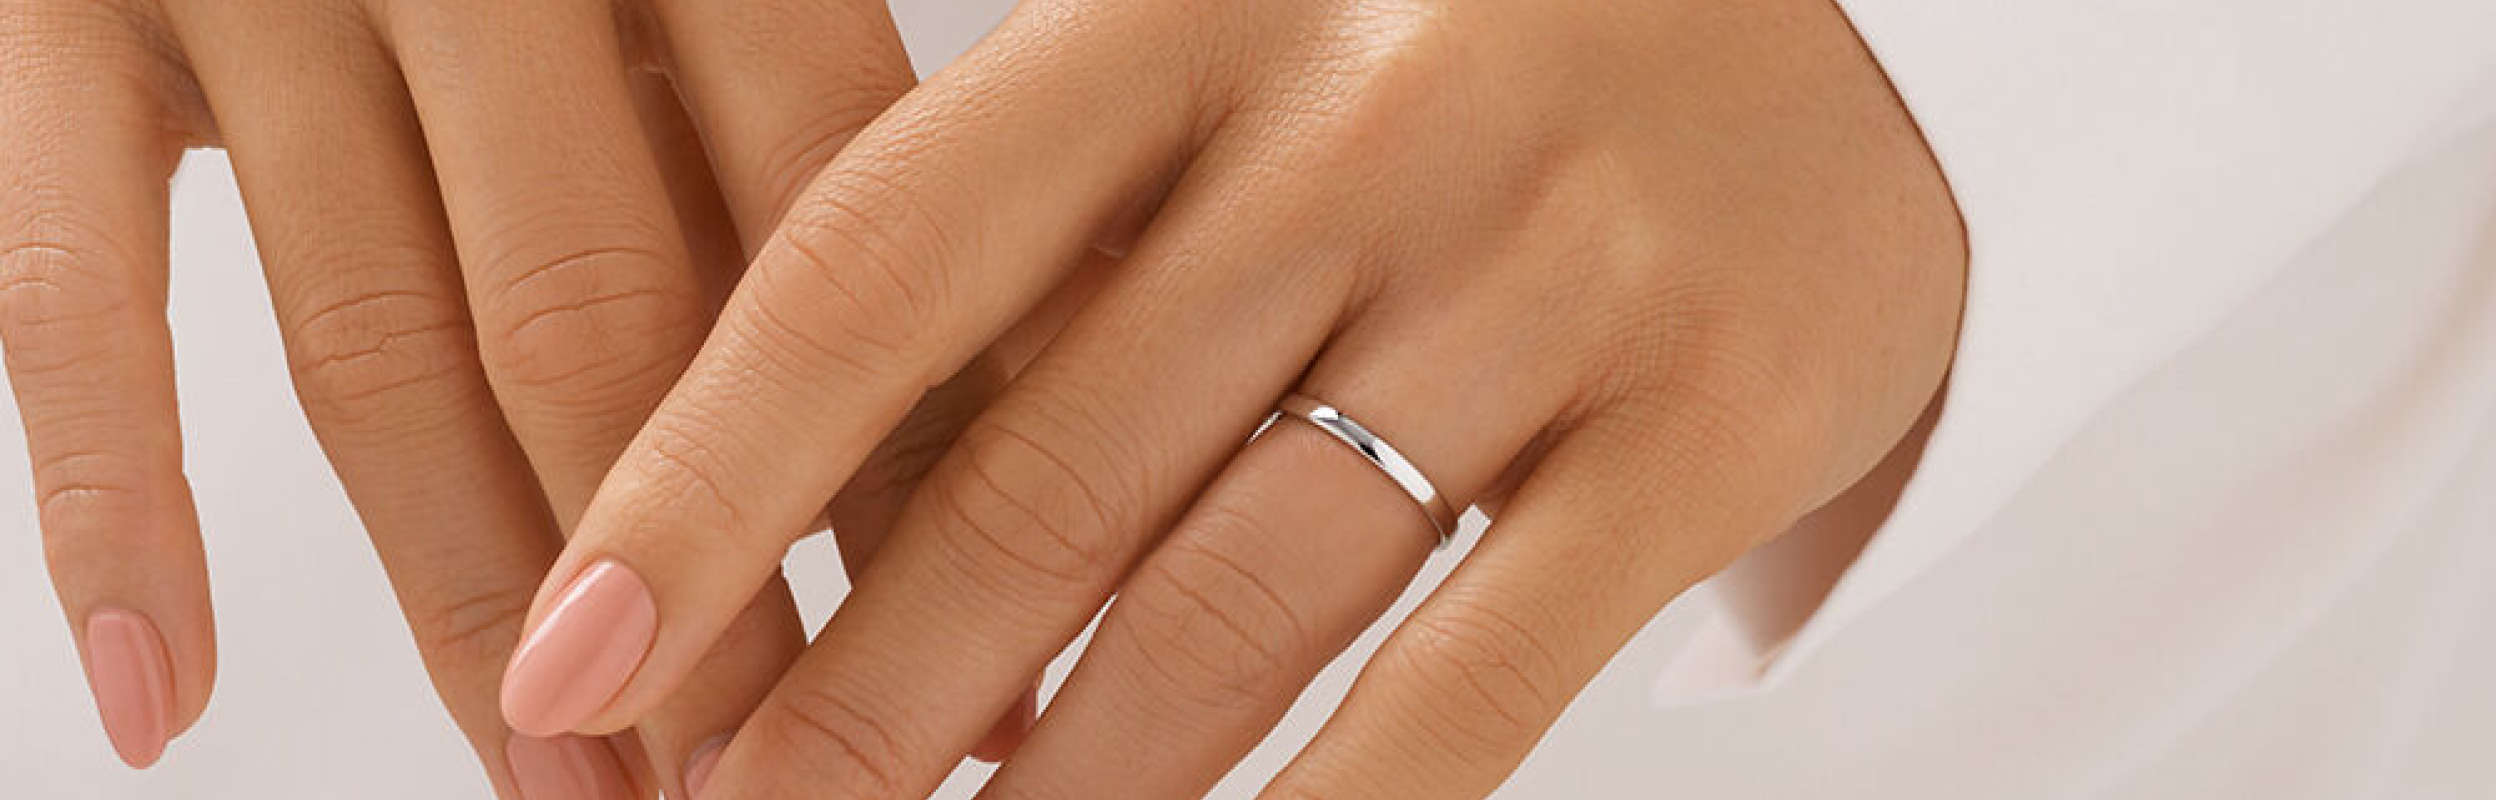 white gold wedding ring on womans hand